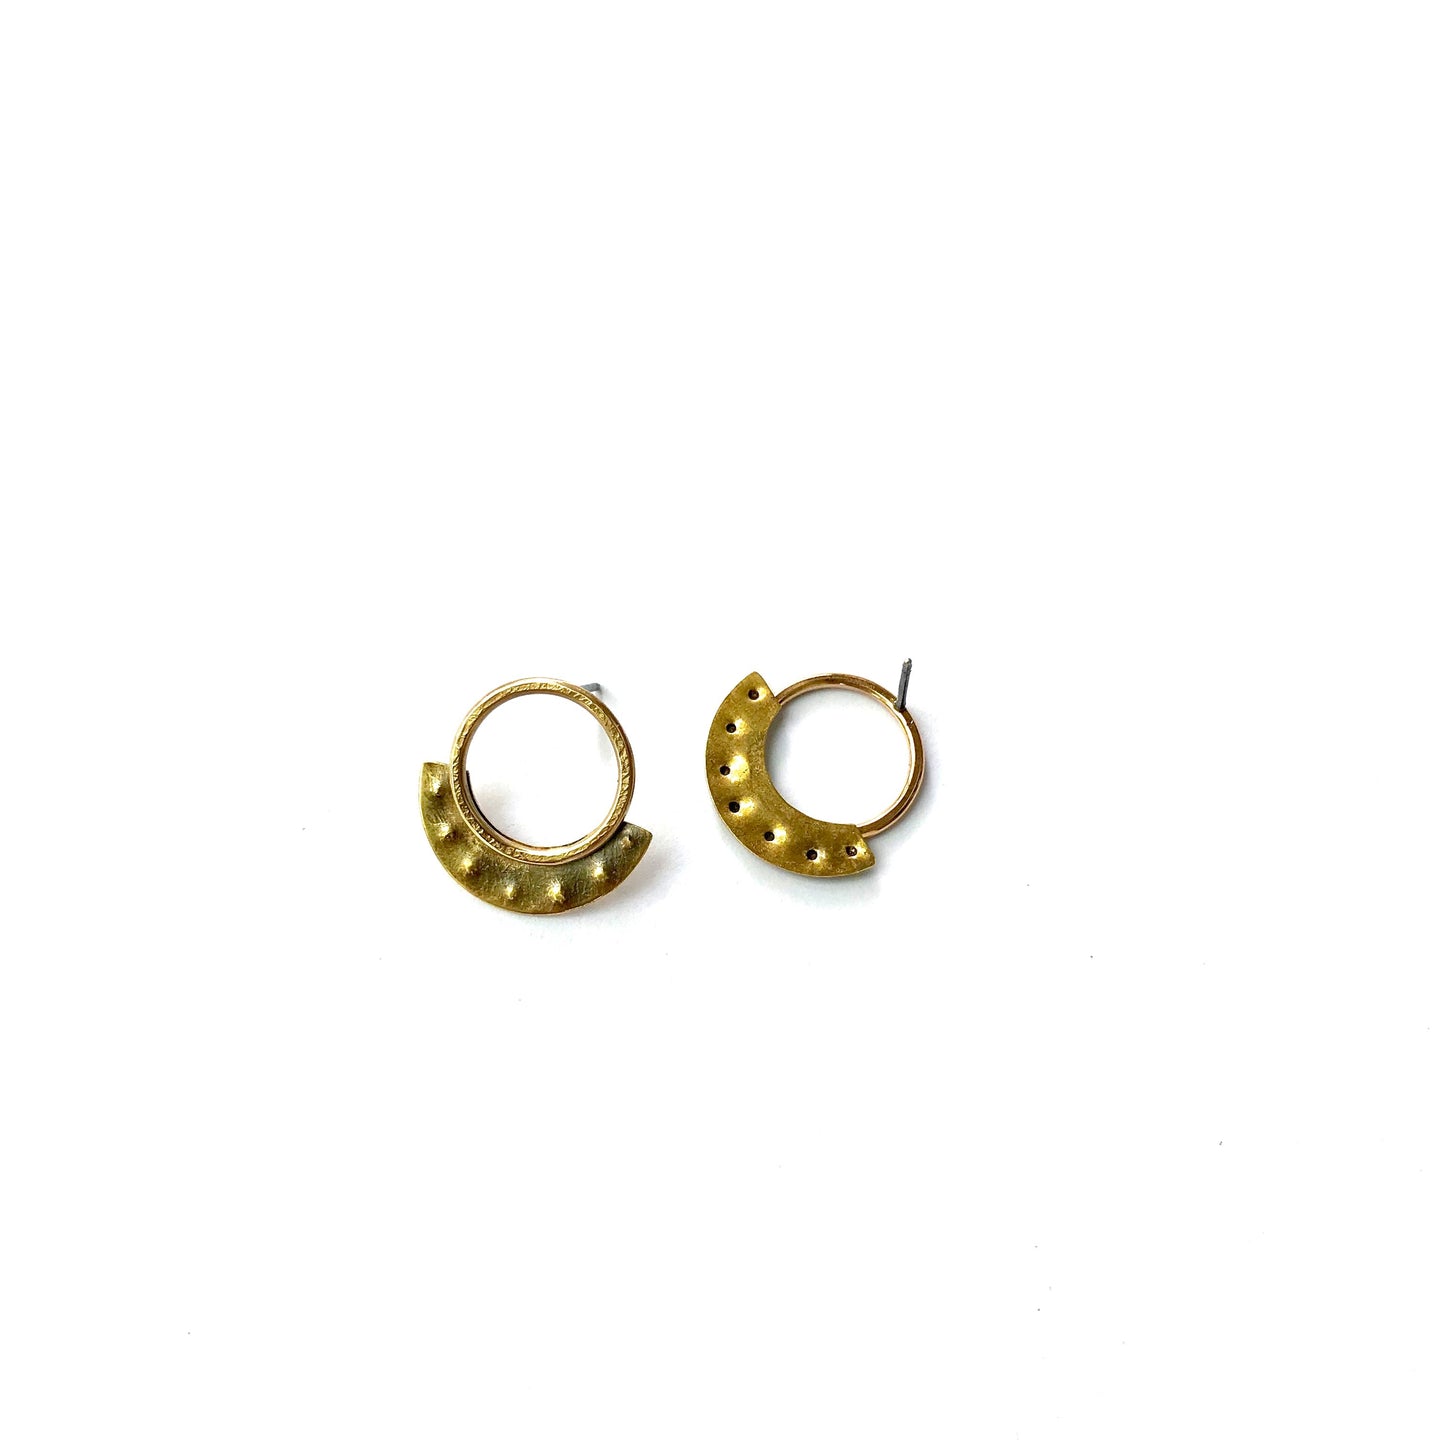 Chia Earrings – Claire Sommers Buck